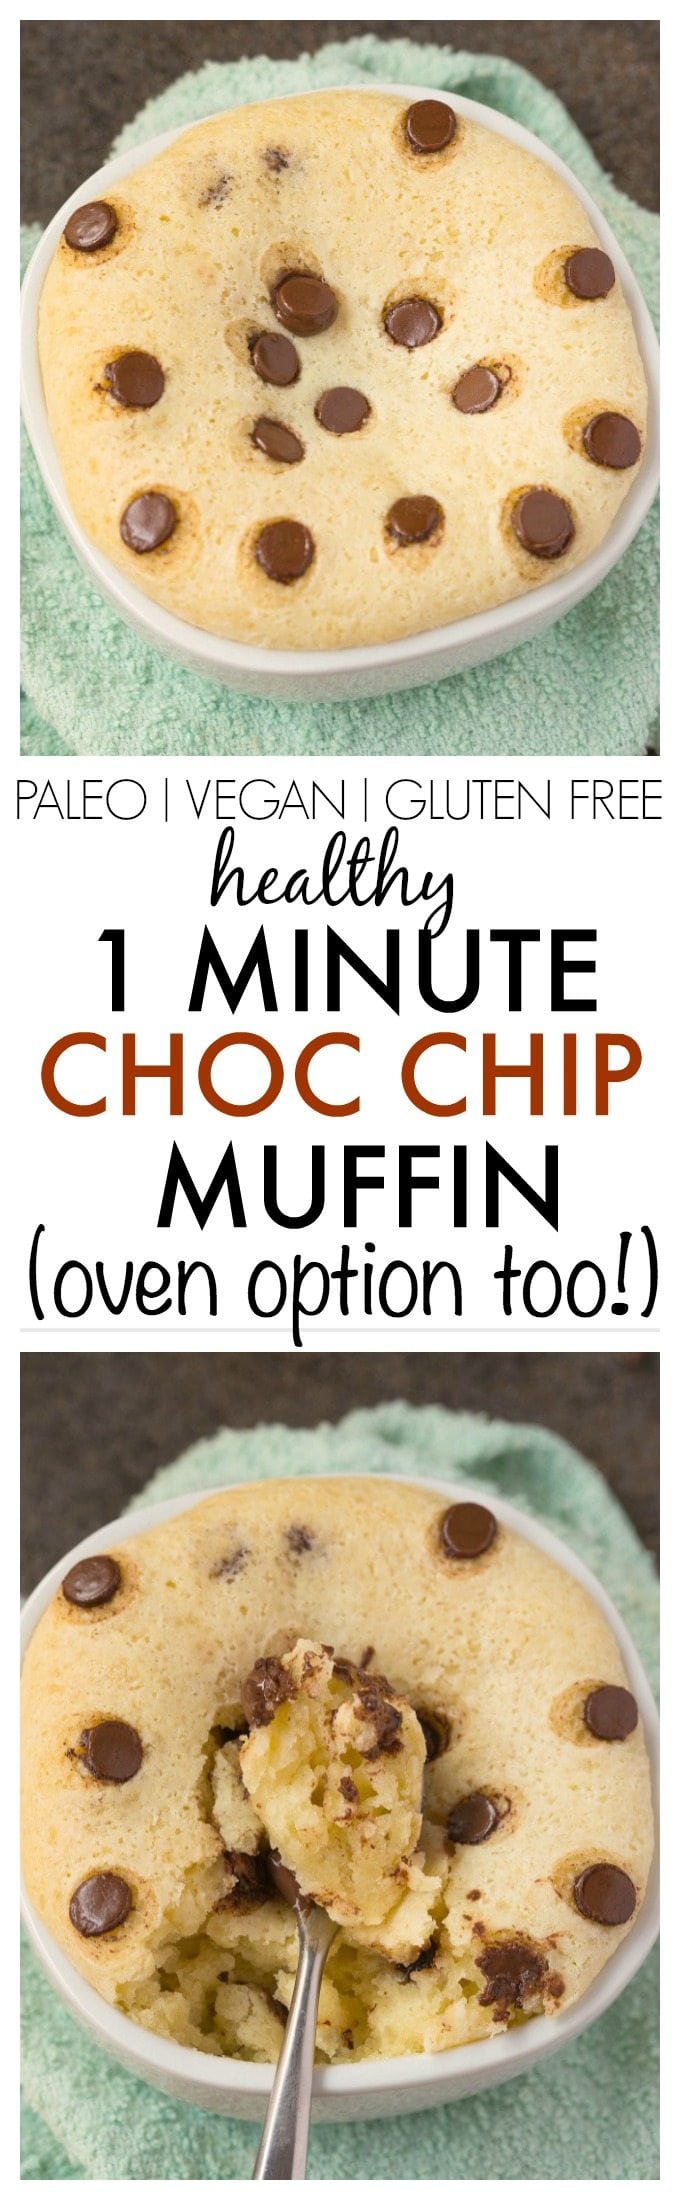 Healthy One Minute Chocolate Chip Muffin Recipe- SUPER fluffy, moist, yet tender on the outside and less than 100 calories and ONE ready in minute- An oven version too! {vegan, gluten free, paleo recipe}-thebigmansworld.com